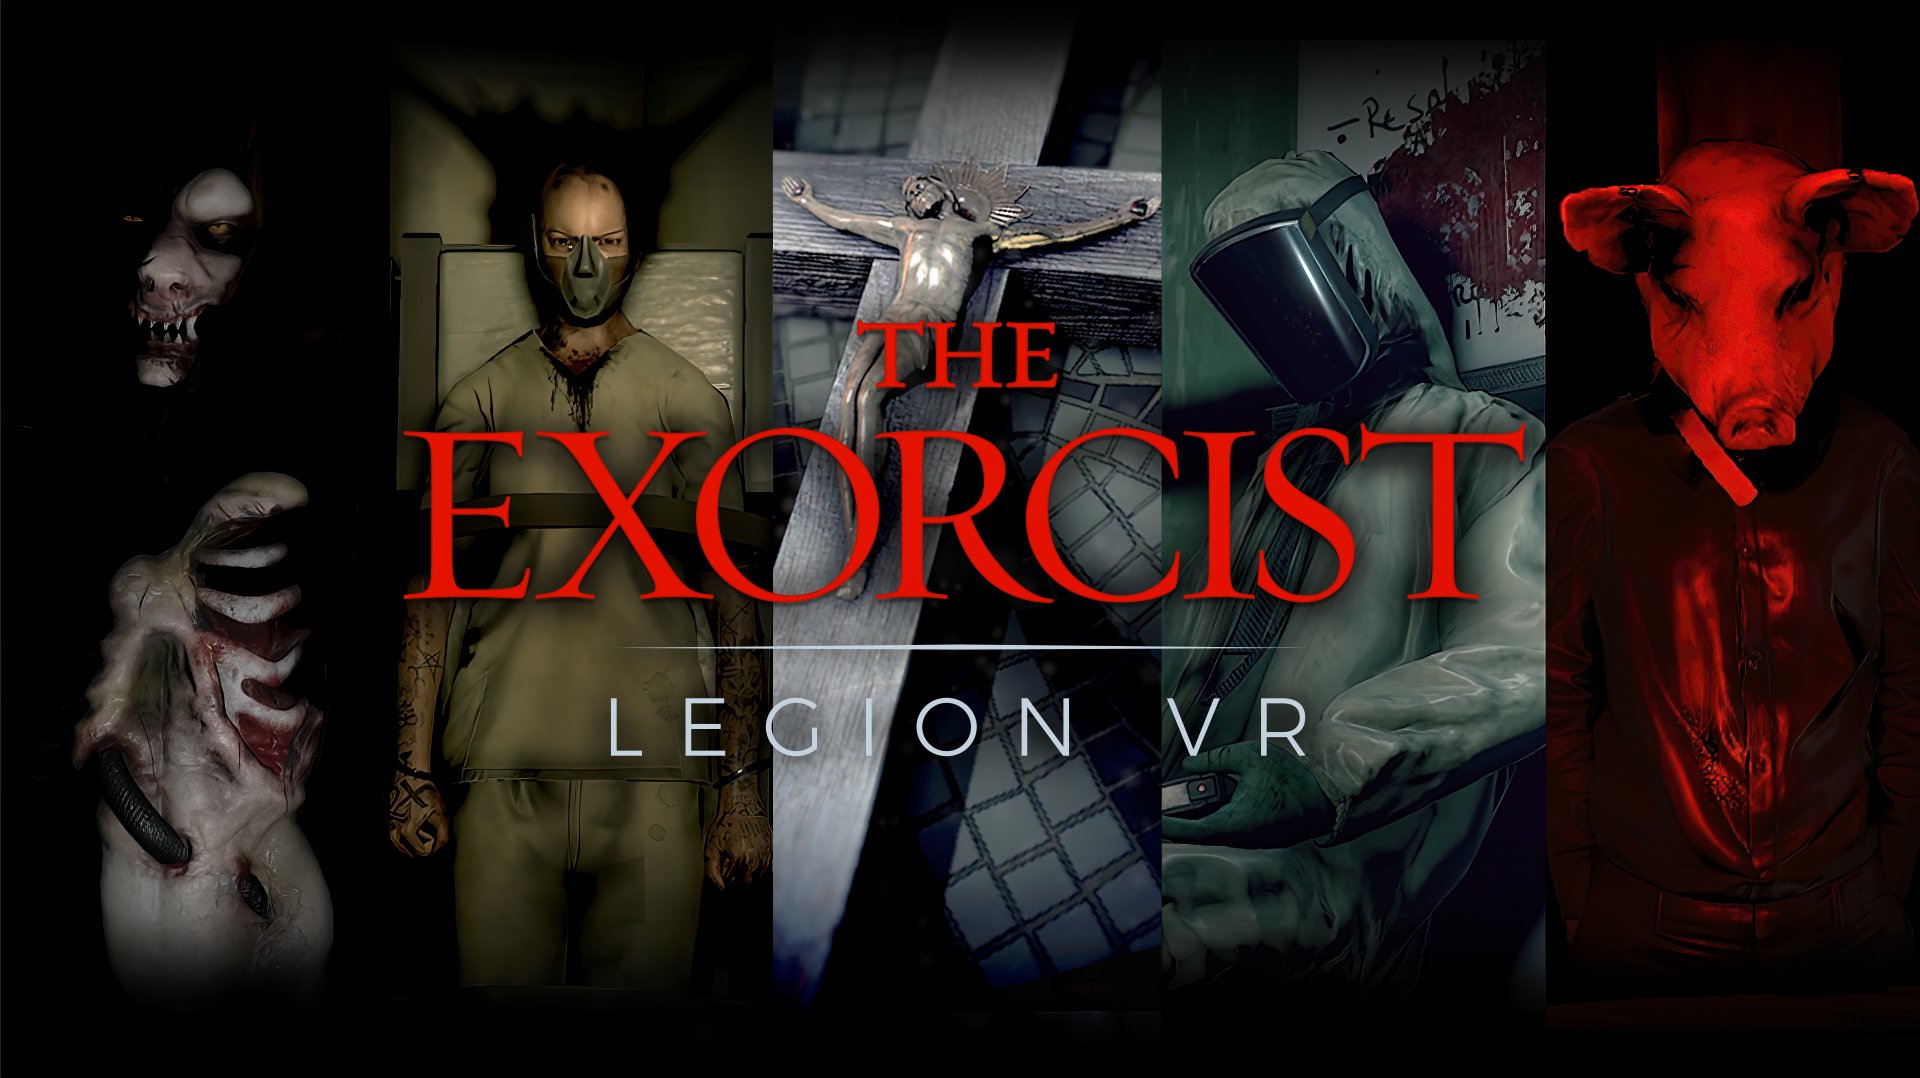 Fun on Twitter: "The Exorcist: Legion VR for Quest is 32% off! Feel the fright for only $16.99 this week 😱💀 https://t.co/zrwkorxfx2 #exorcistvr #vrhorror #vr https://t.co/Z11TMiwfEd" / Twitter